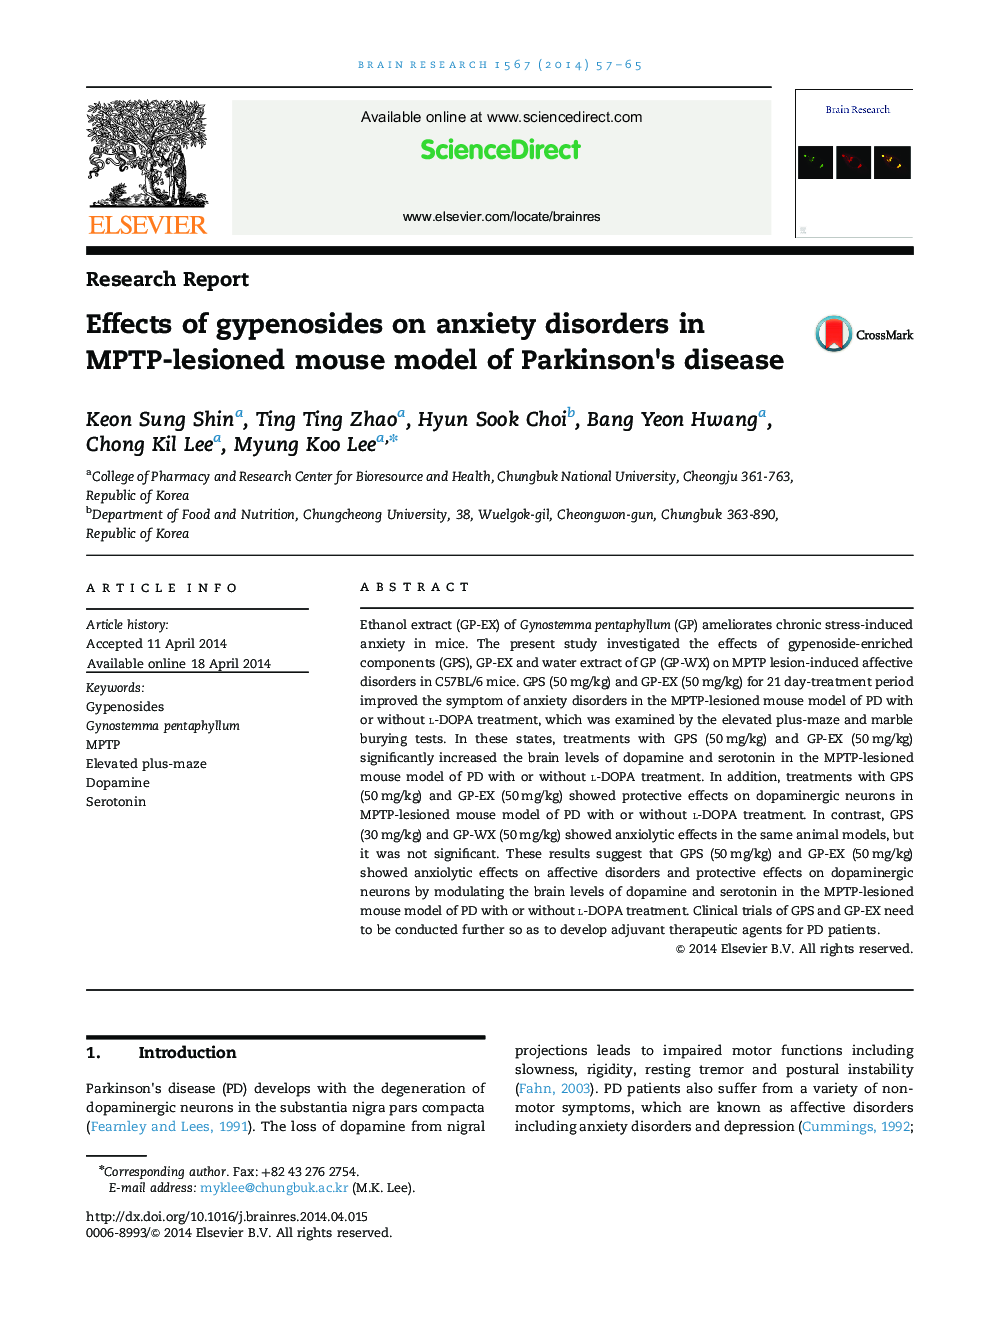 Effects of gypenosides on anxiety disorders in MPTP-lesioned mouse model of Parkinson׳s disease